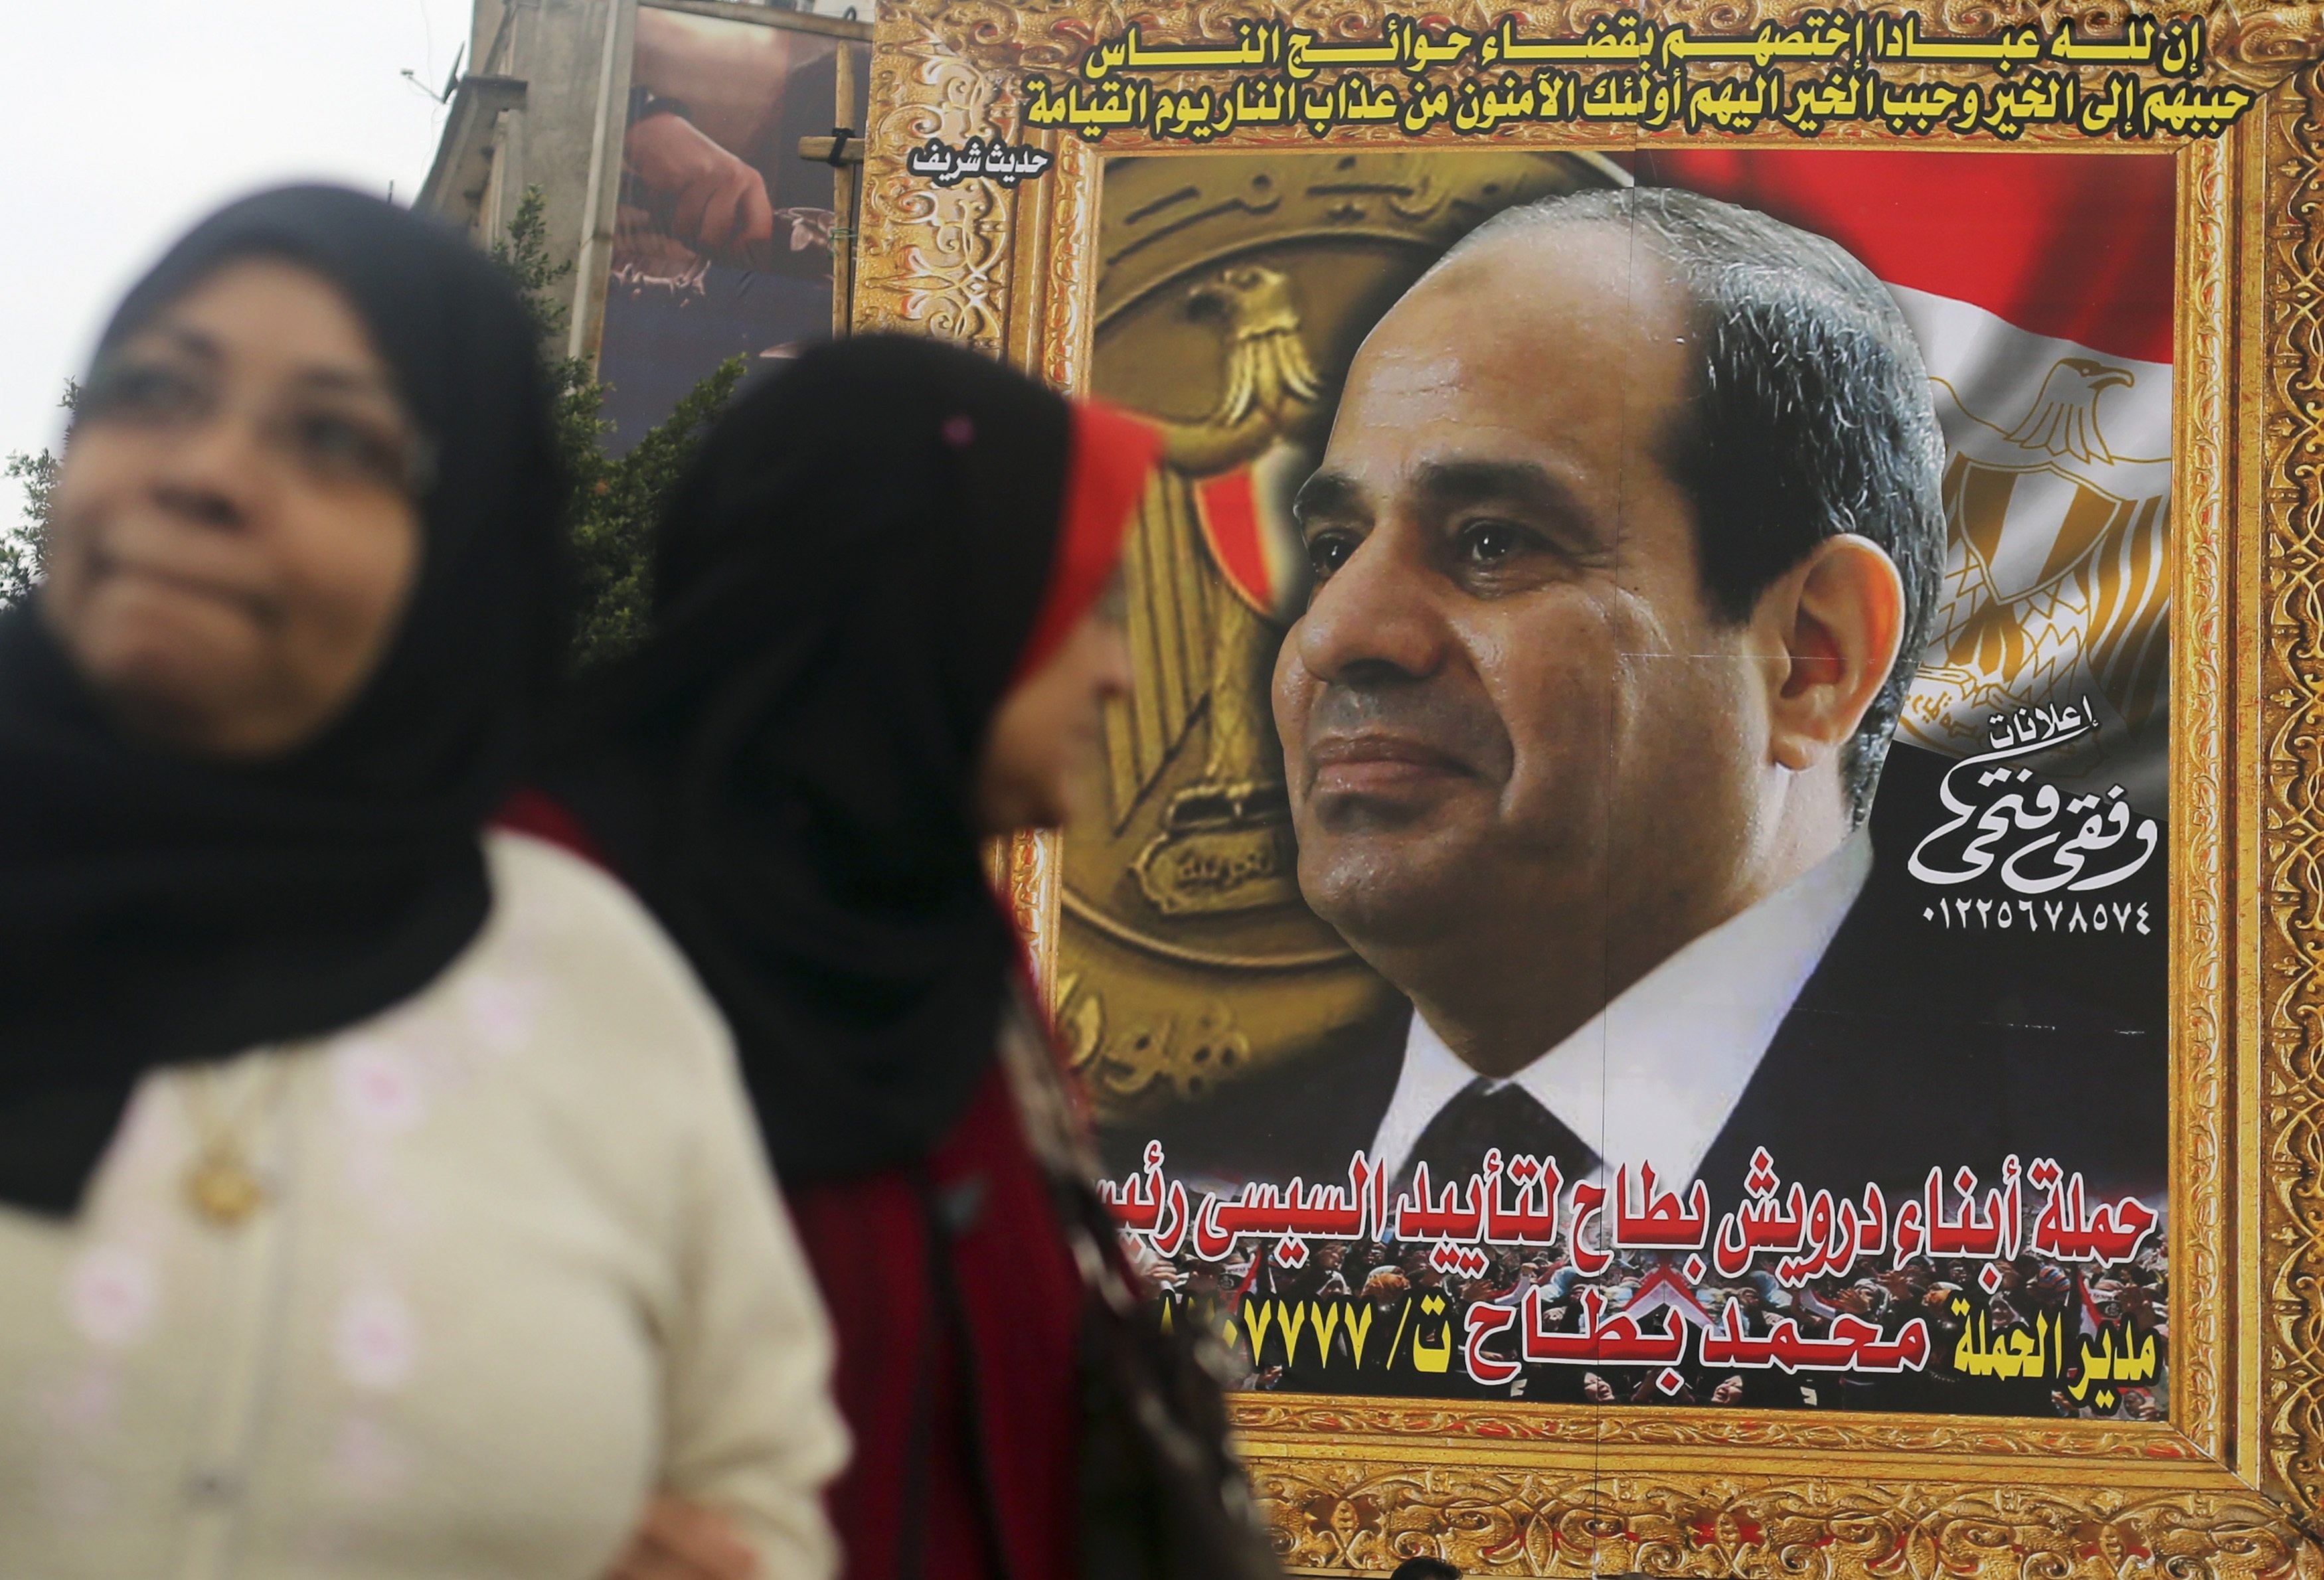 Women walk in front of huge banner for Egypt's army chief, al-Sisi in downtown Cairo